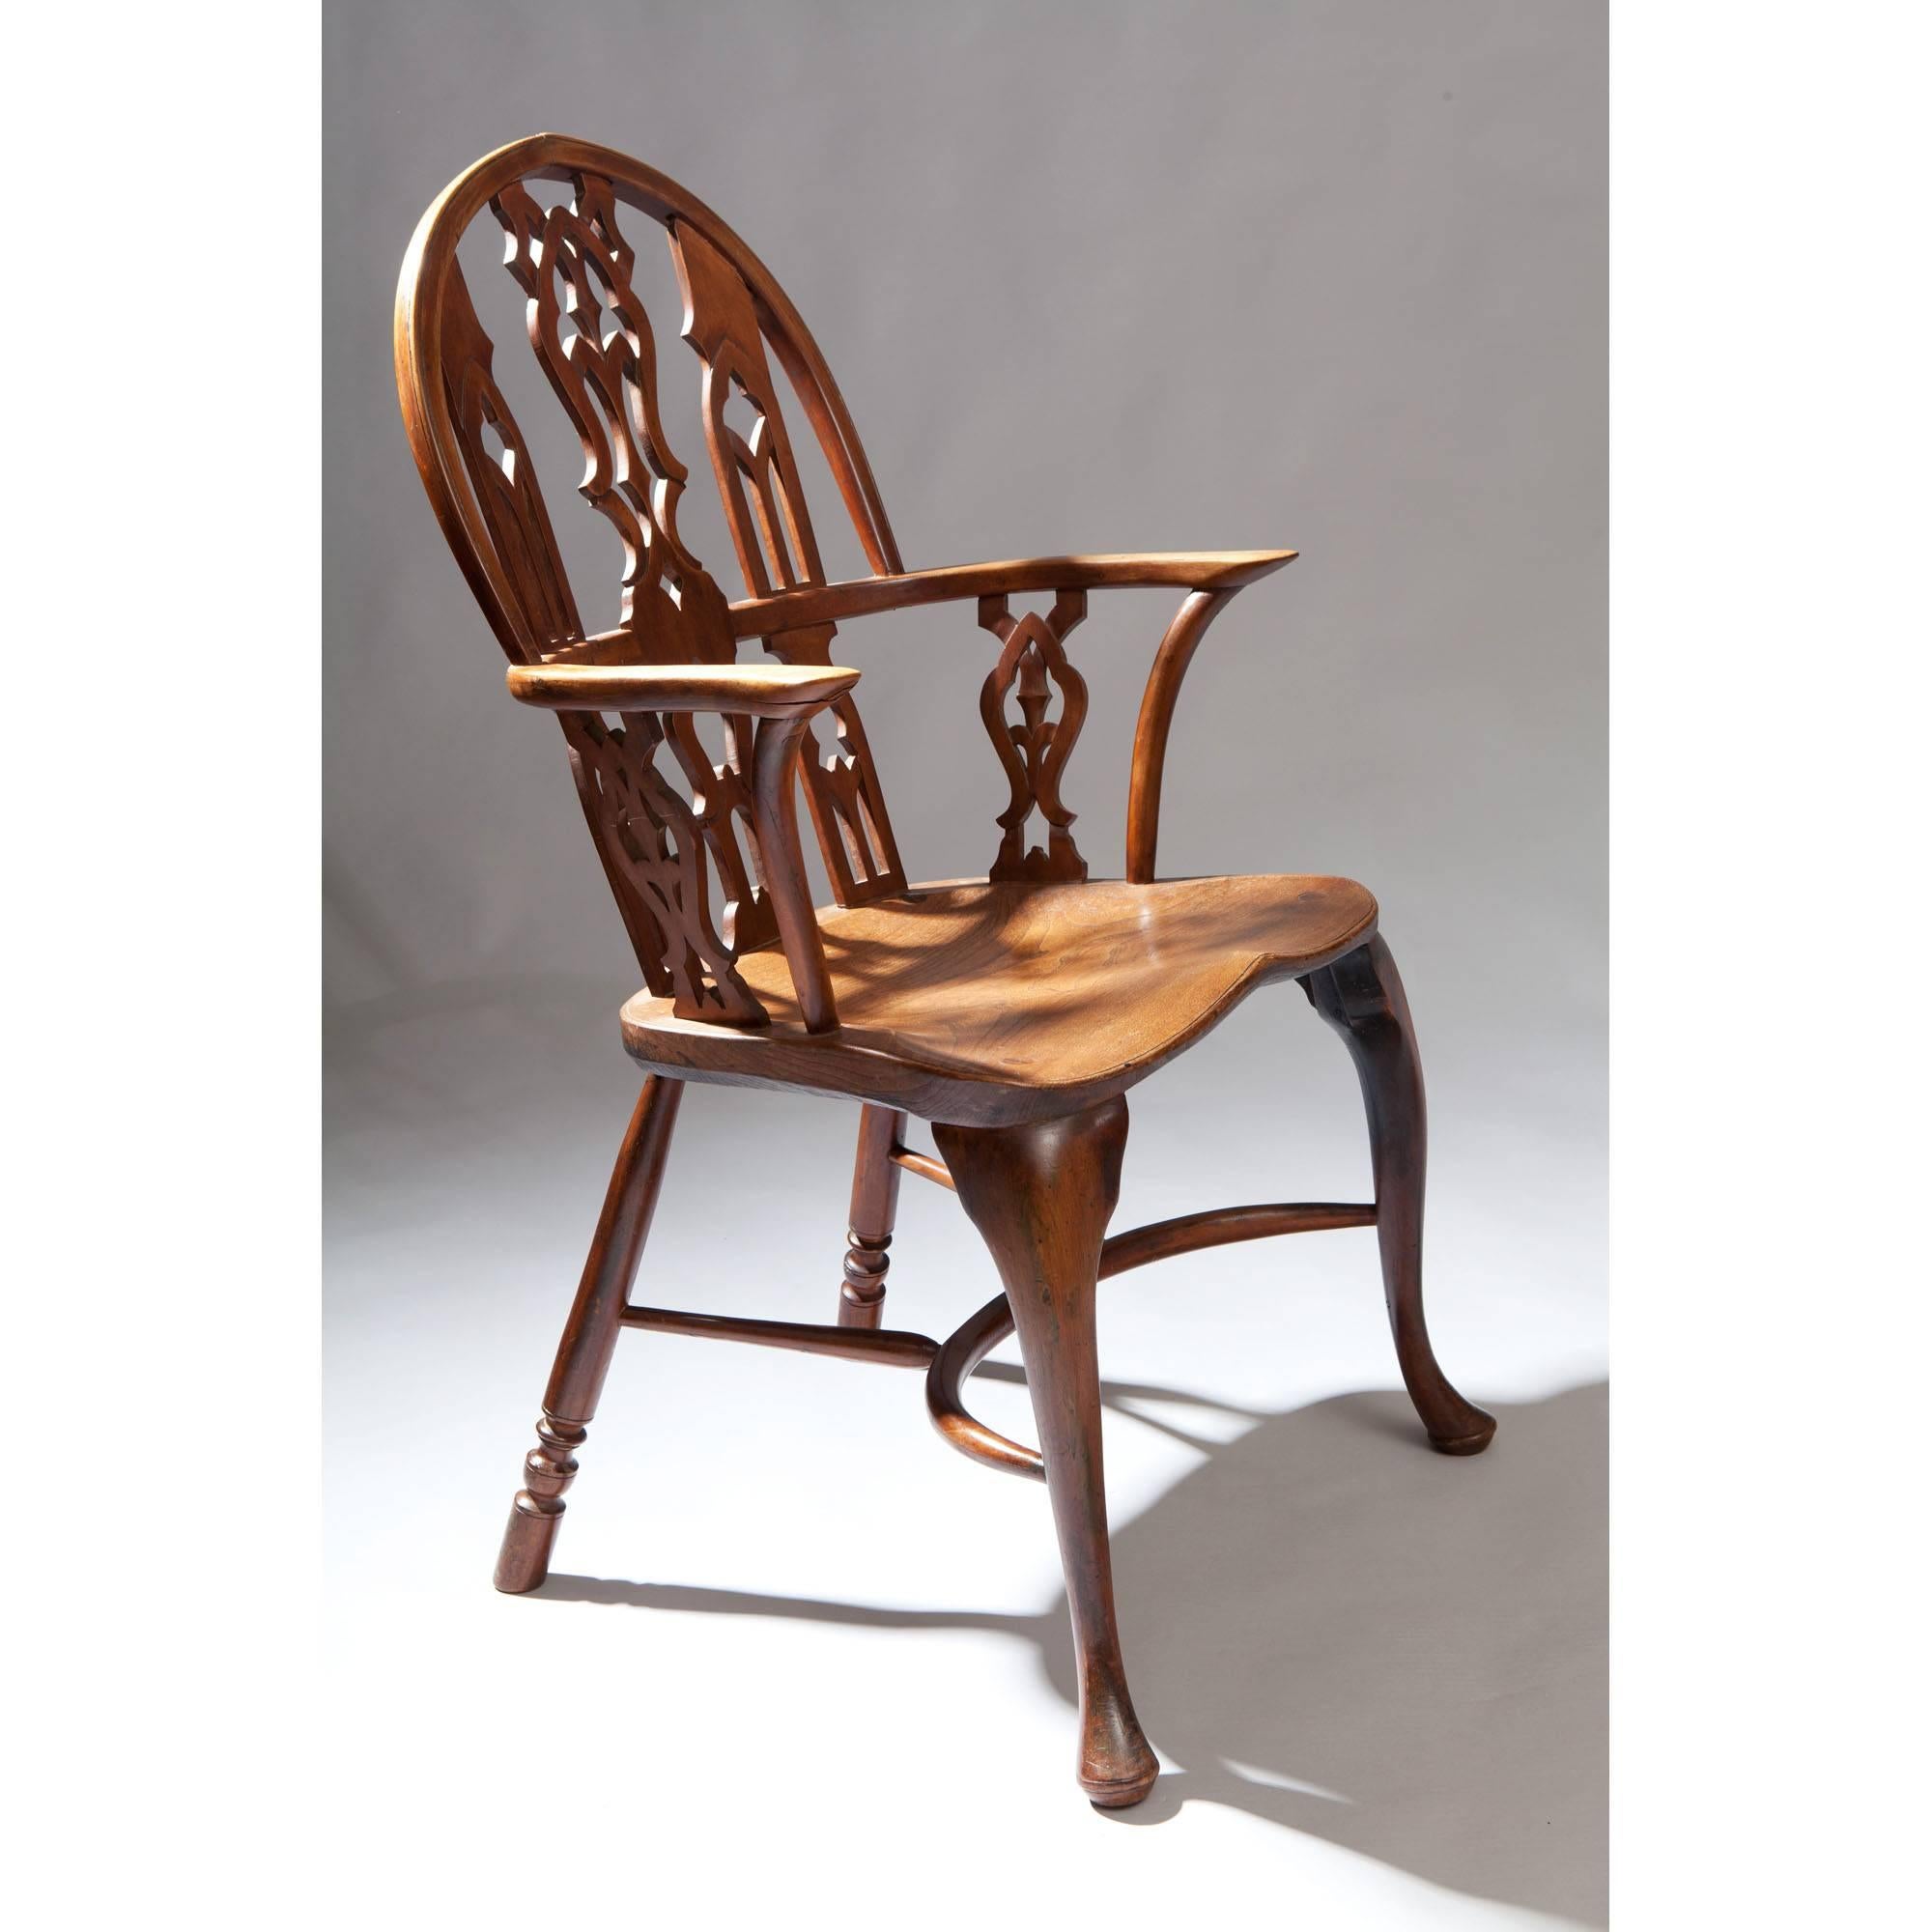 A fine pair of Gothic elm and yew wood windsor chairs.